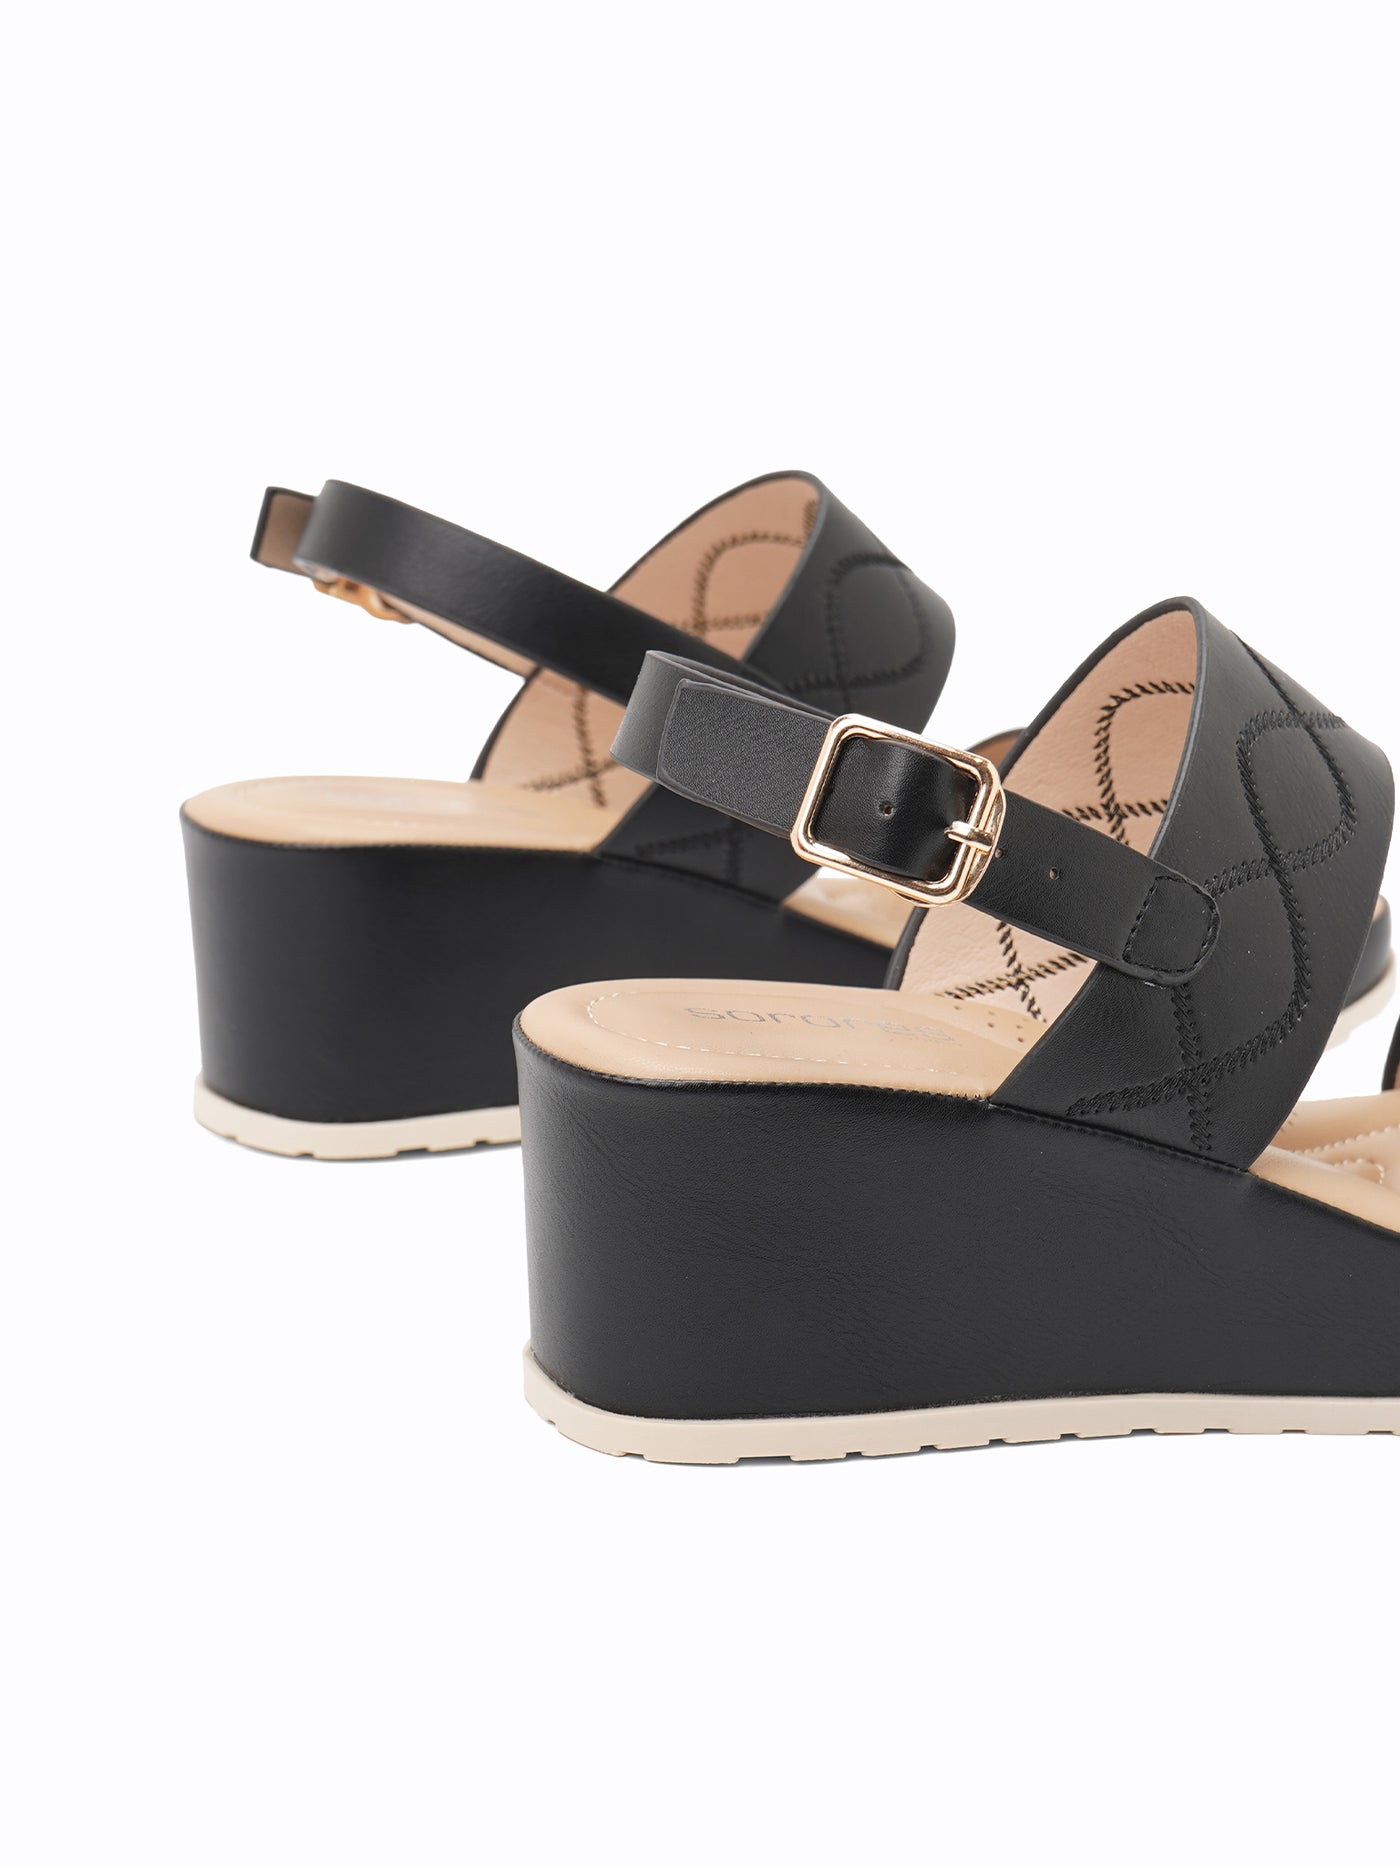 Crispin Wedge Sandals